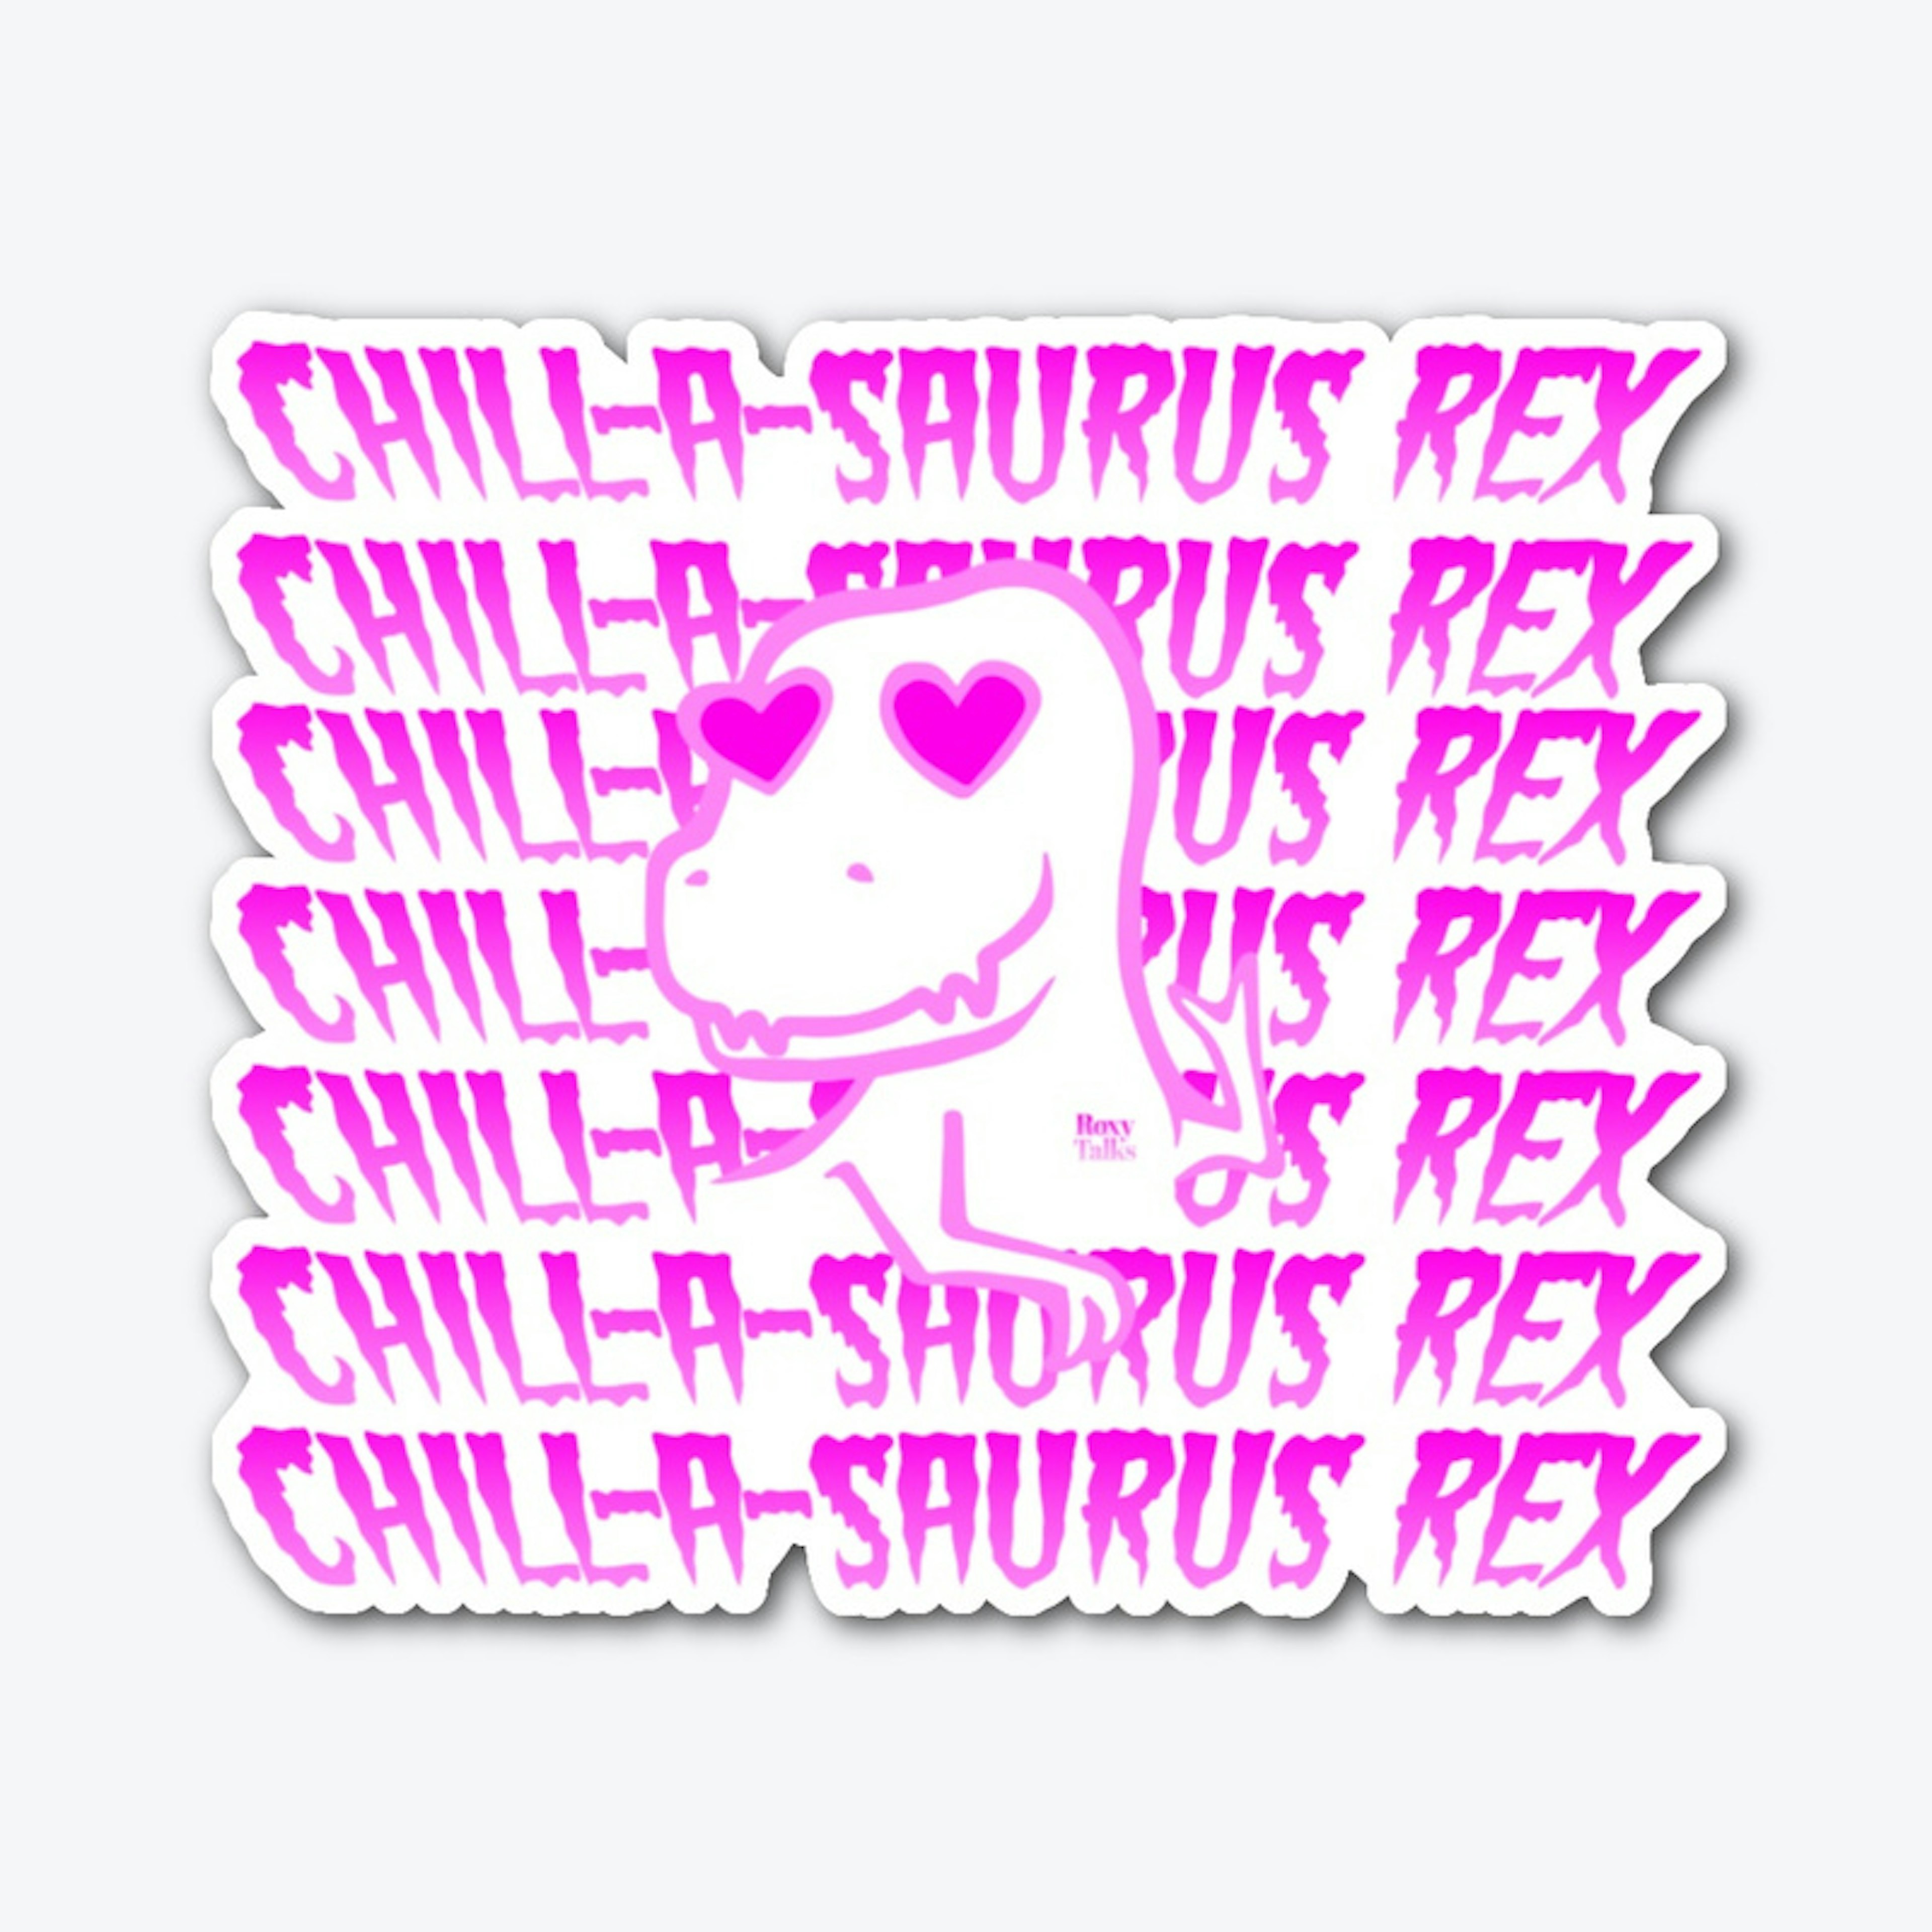 Chill-a-Saurus All Over